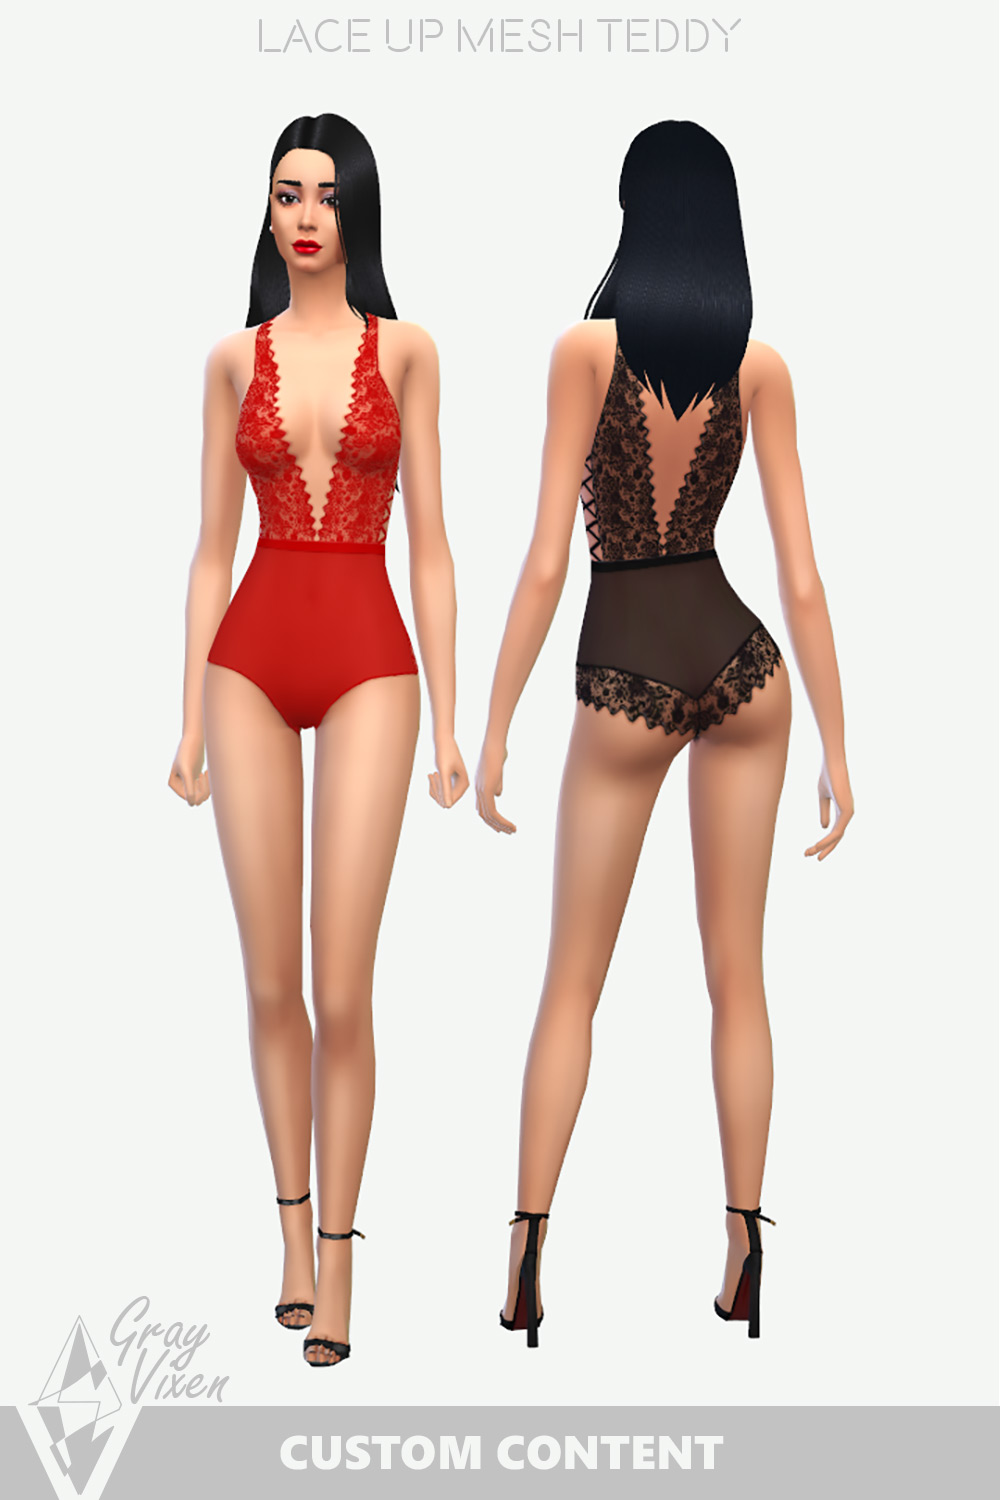 The Sims 4 Lingerie